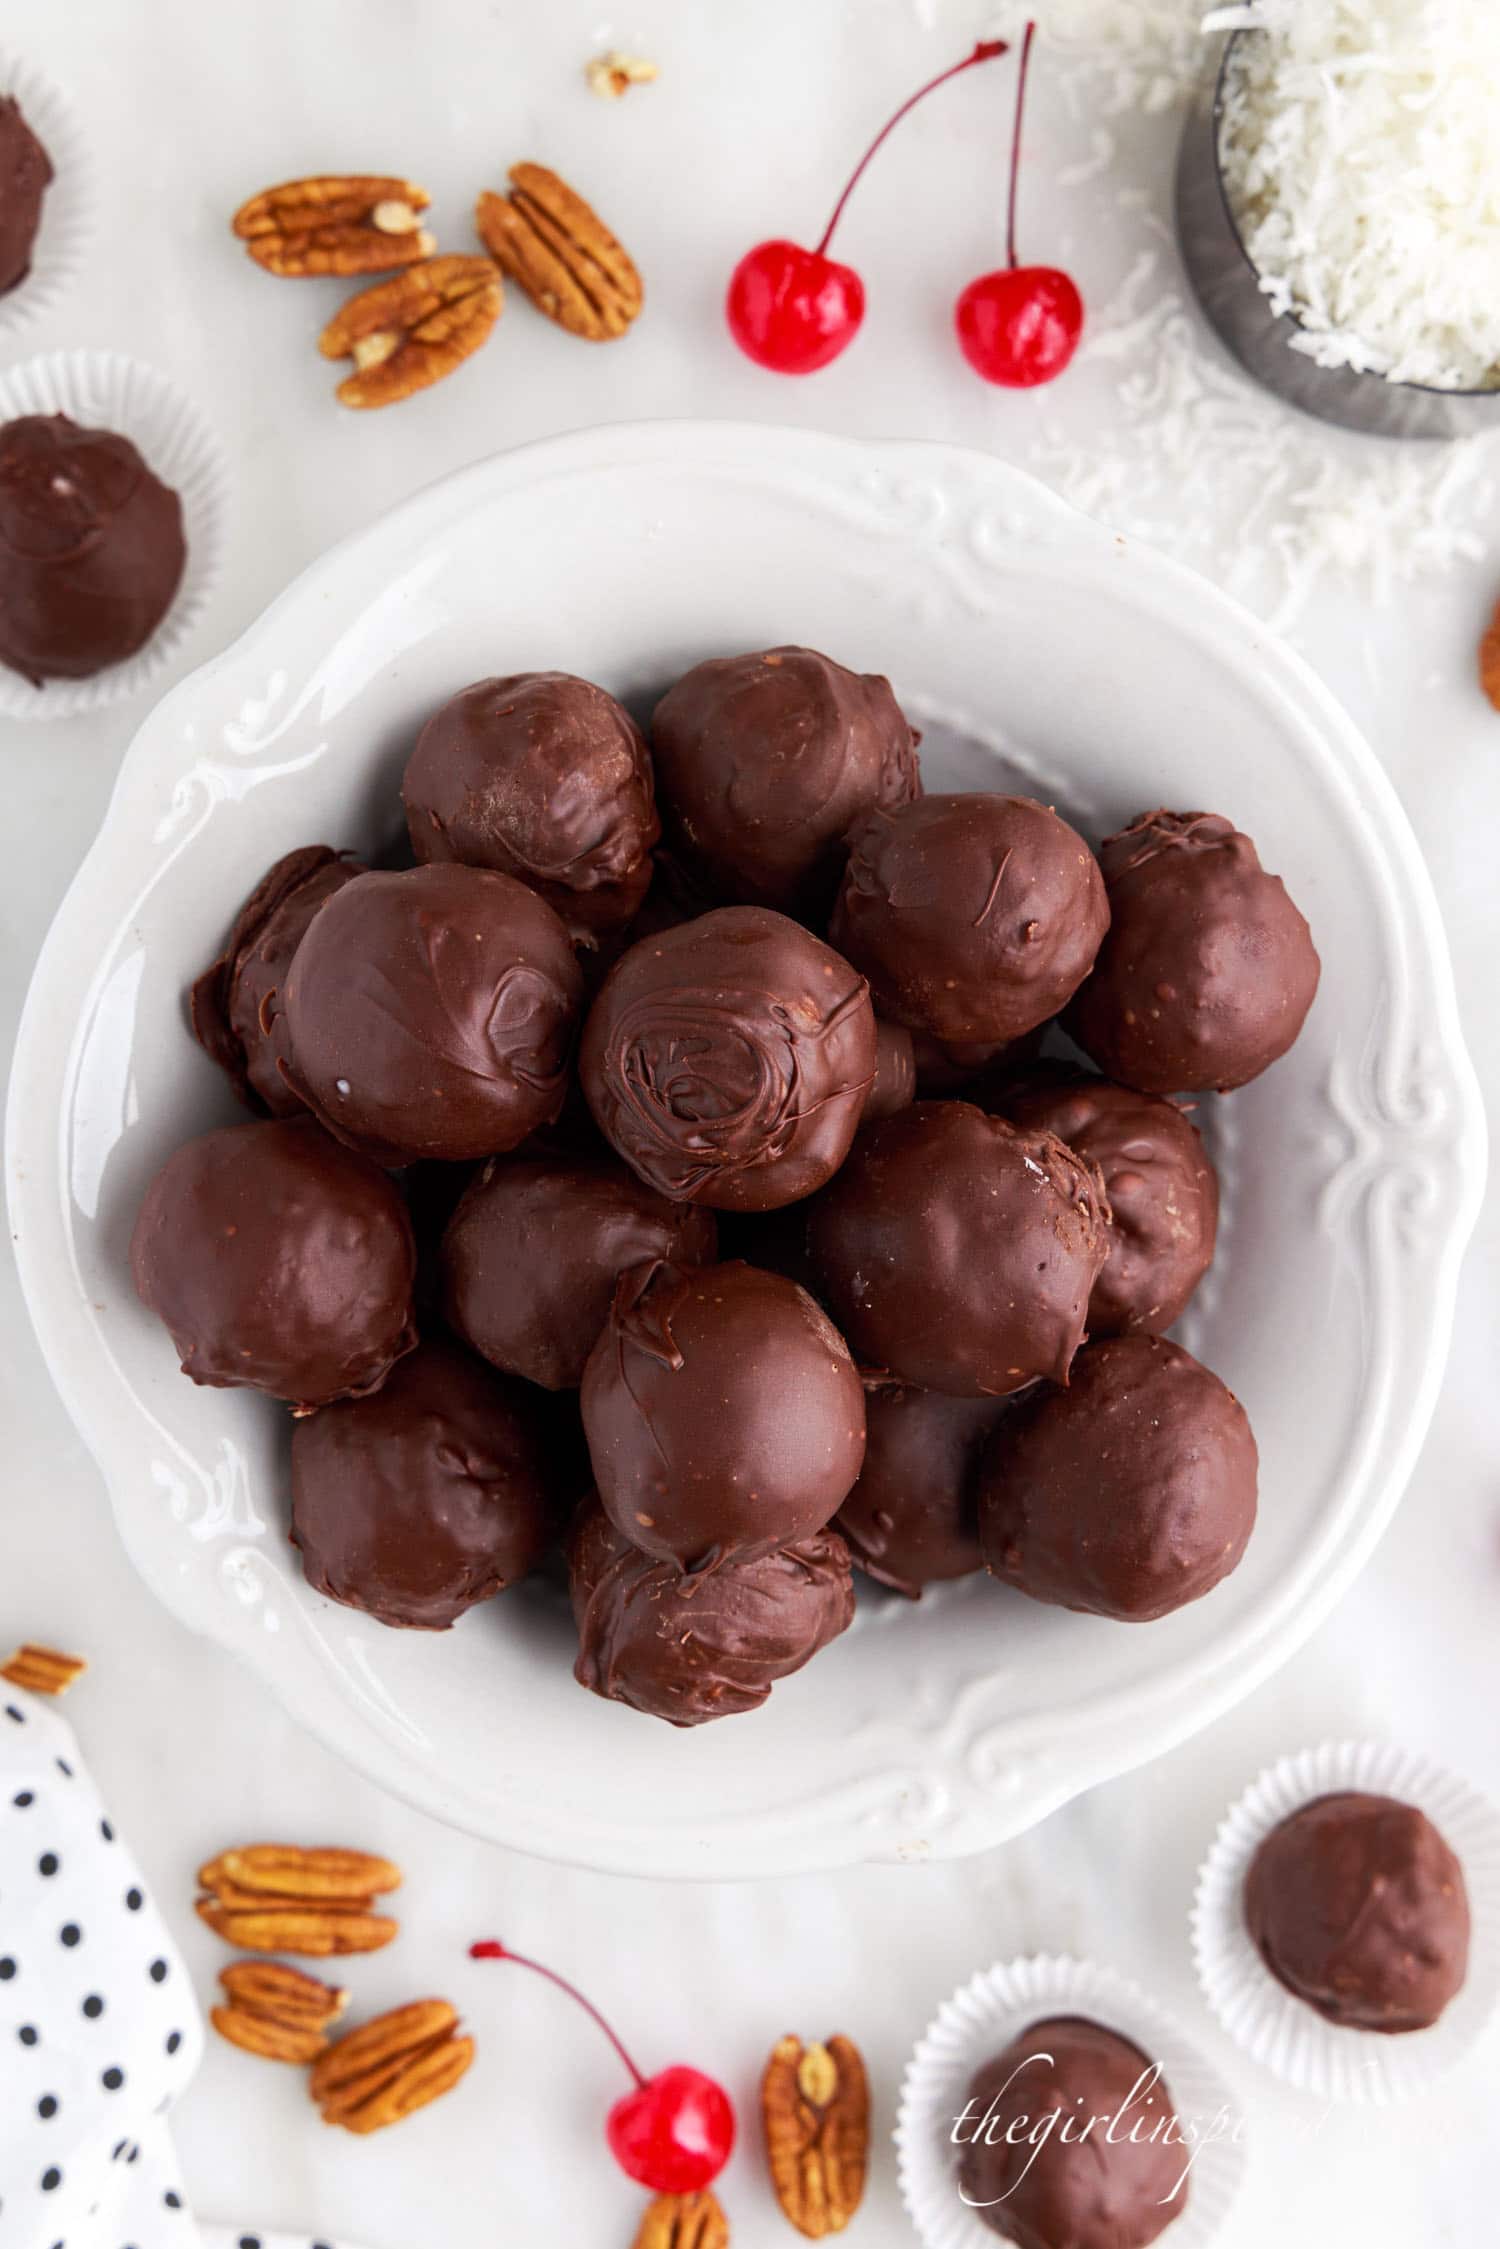 bowl filled with chocolate coated balls, maraschino cherries and pecans scattered about.